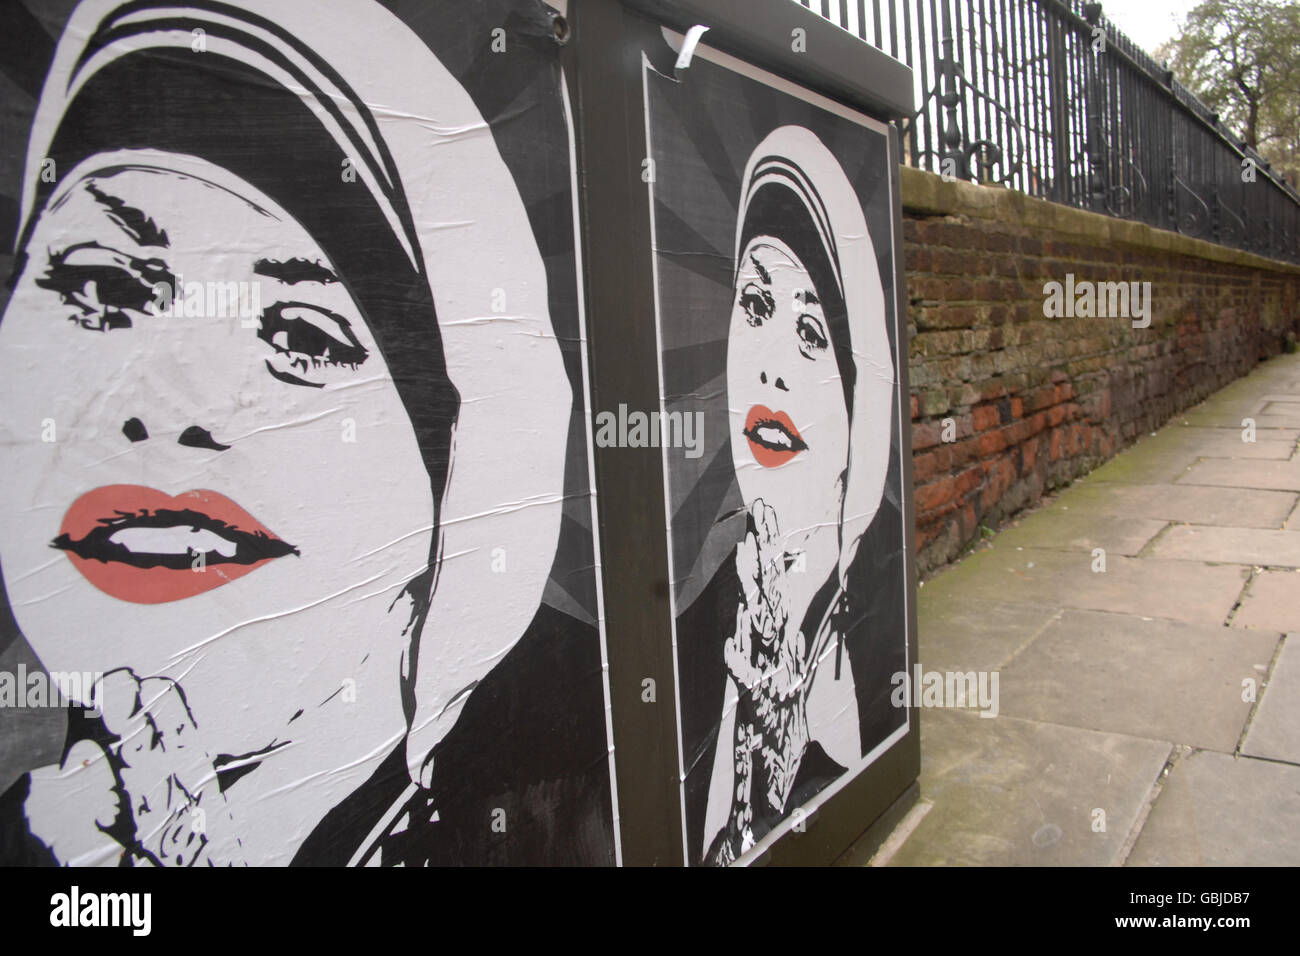 A graffiti artist's depiction of Jade Goody appearing as Mother Teresa outside Saint Mary's Church in Nottingham Stock Photo